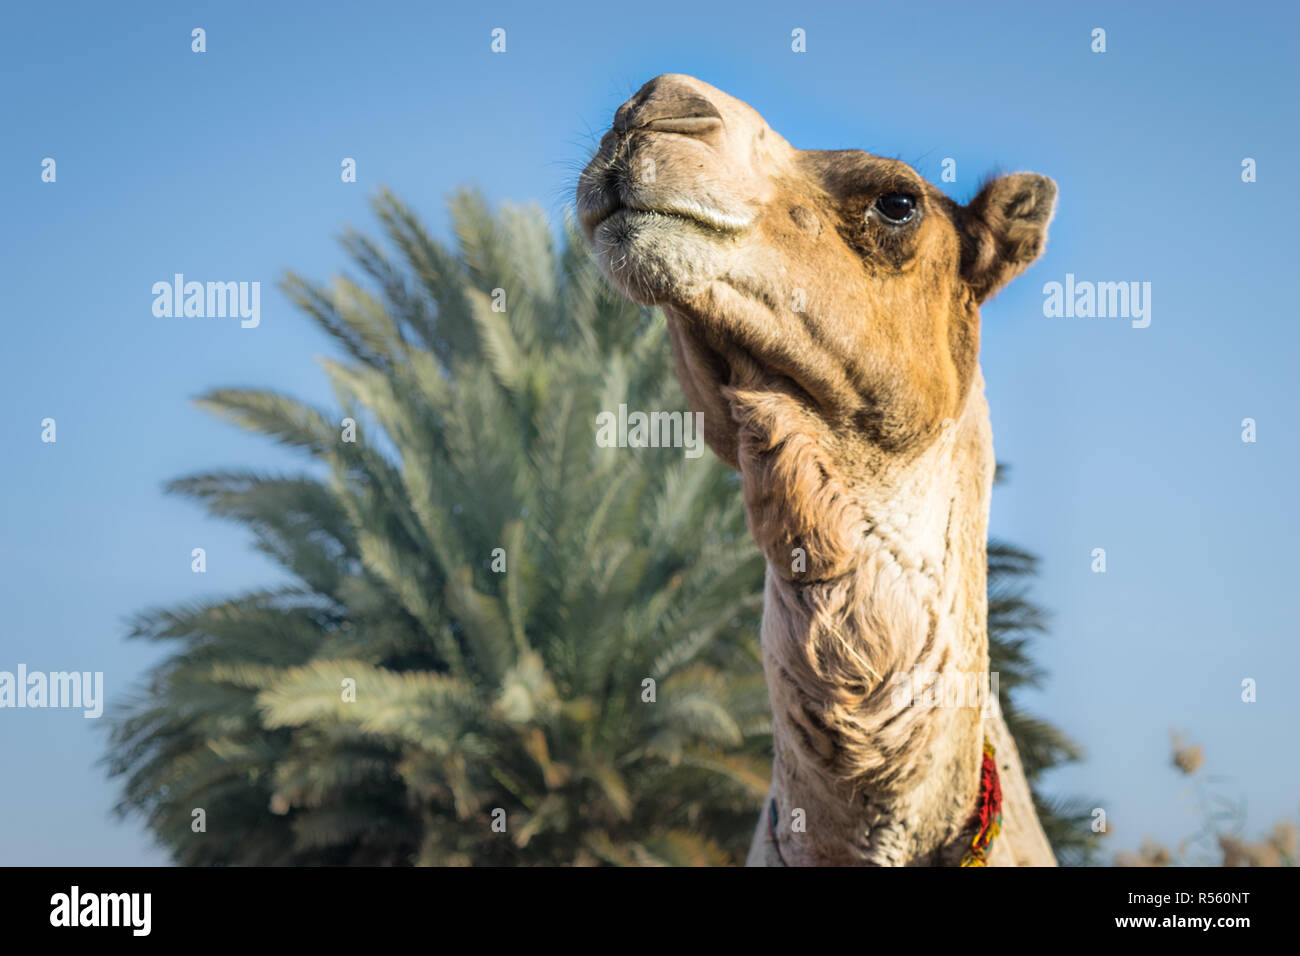 Arabian Camel with accessories look in Aswan Egypt Stock Photo